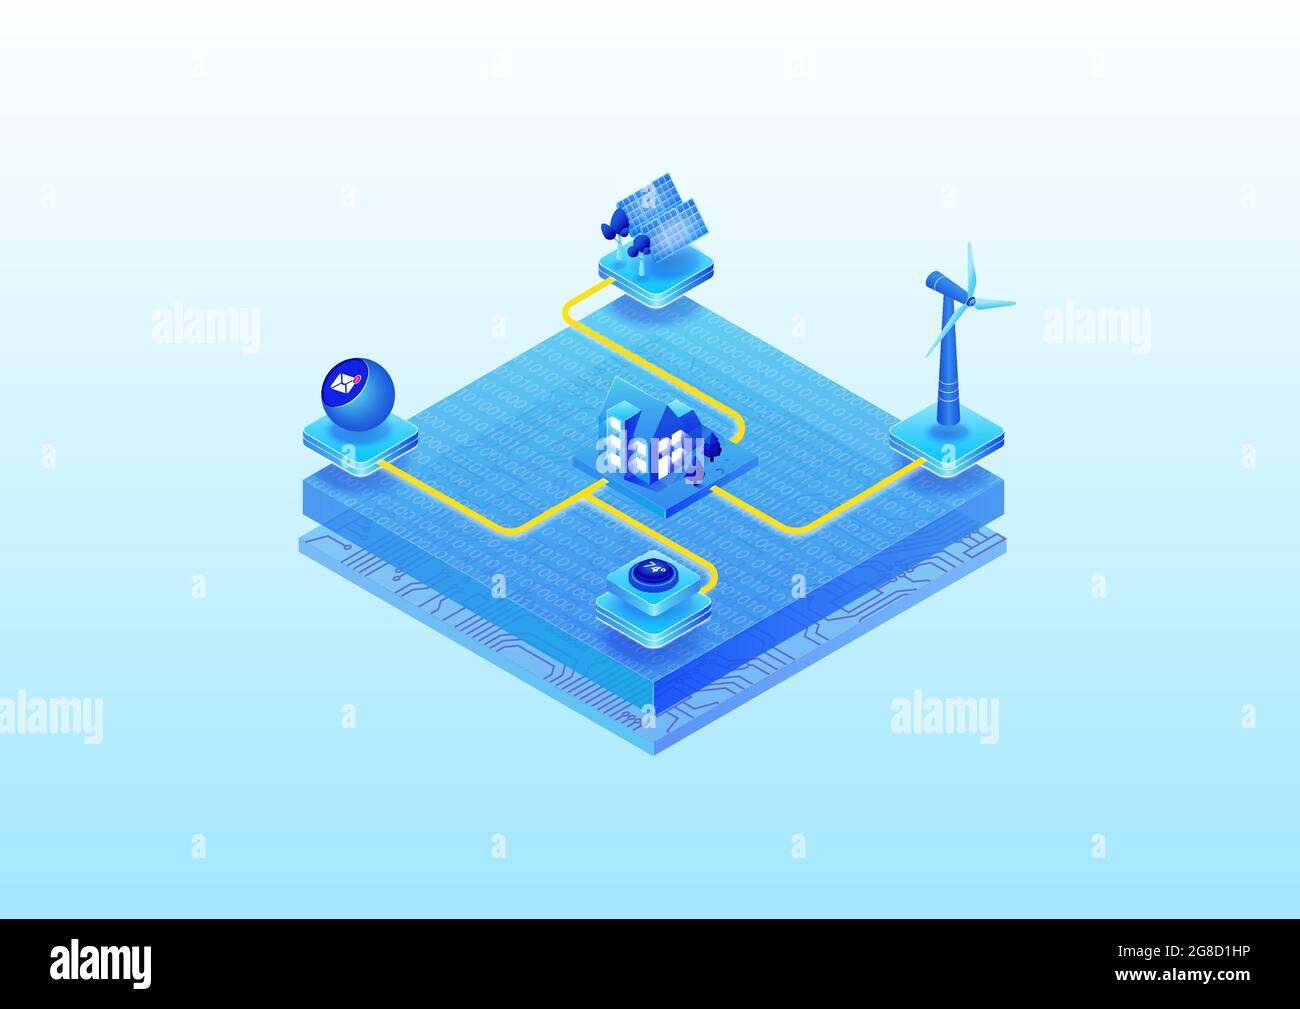 Smart home concept as 3D isometric vector illustration. Home appliances powered by renewable energy sources like solar and wind. Stock Vector